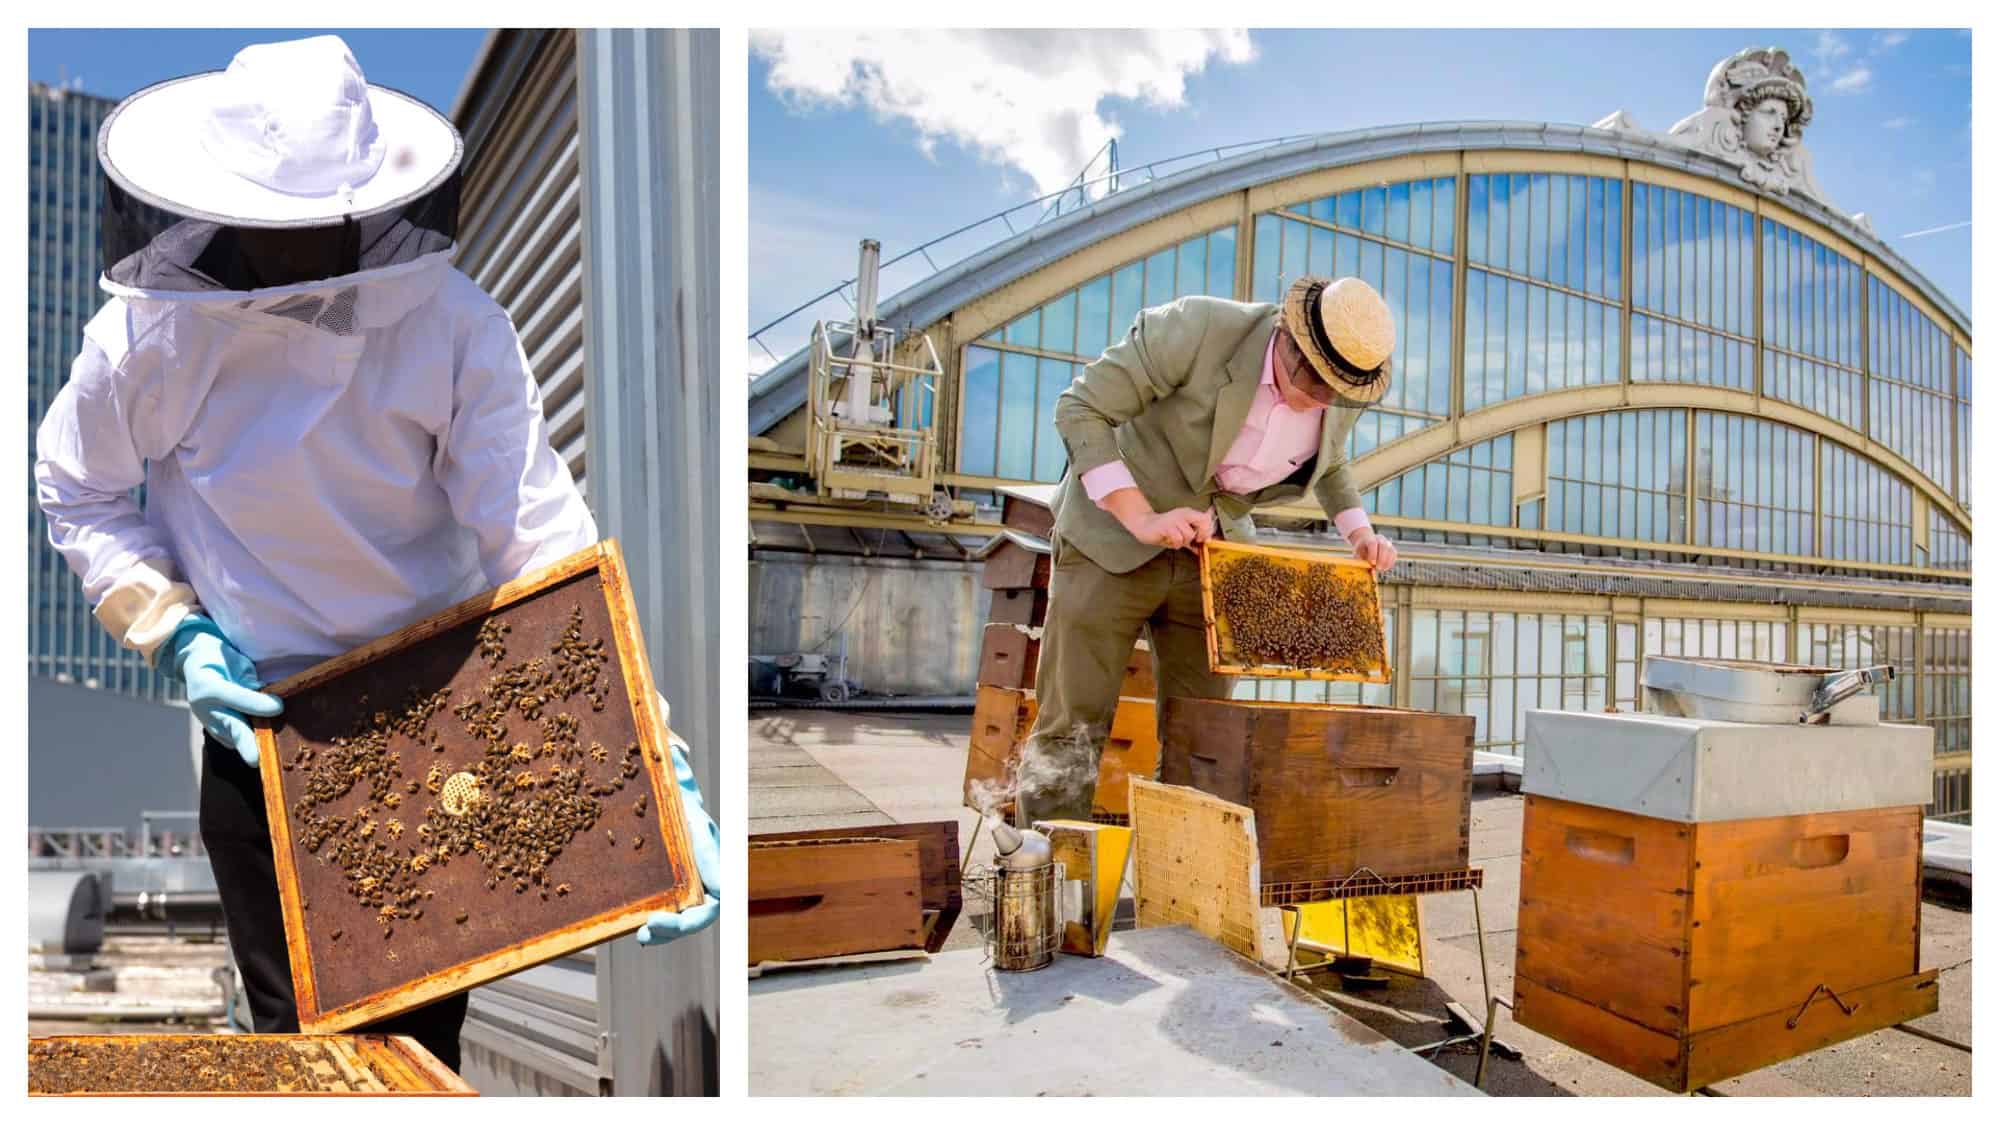 Beekeepers tending to their hives on the Paris rooftops.